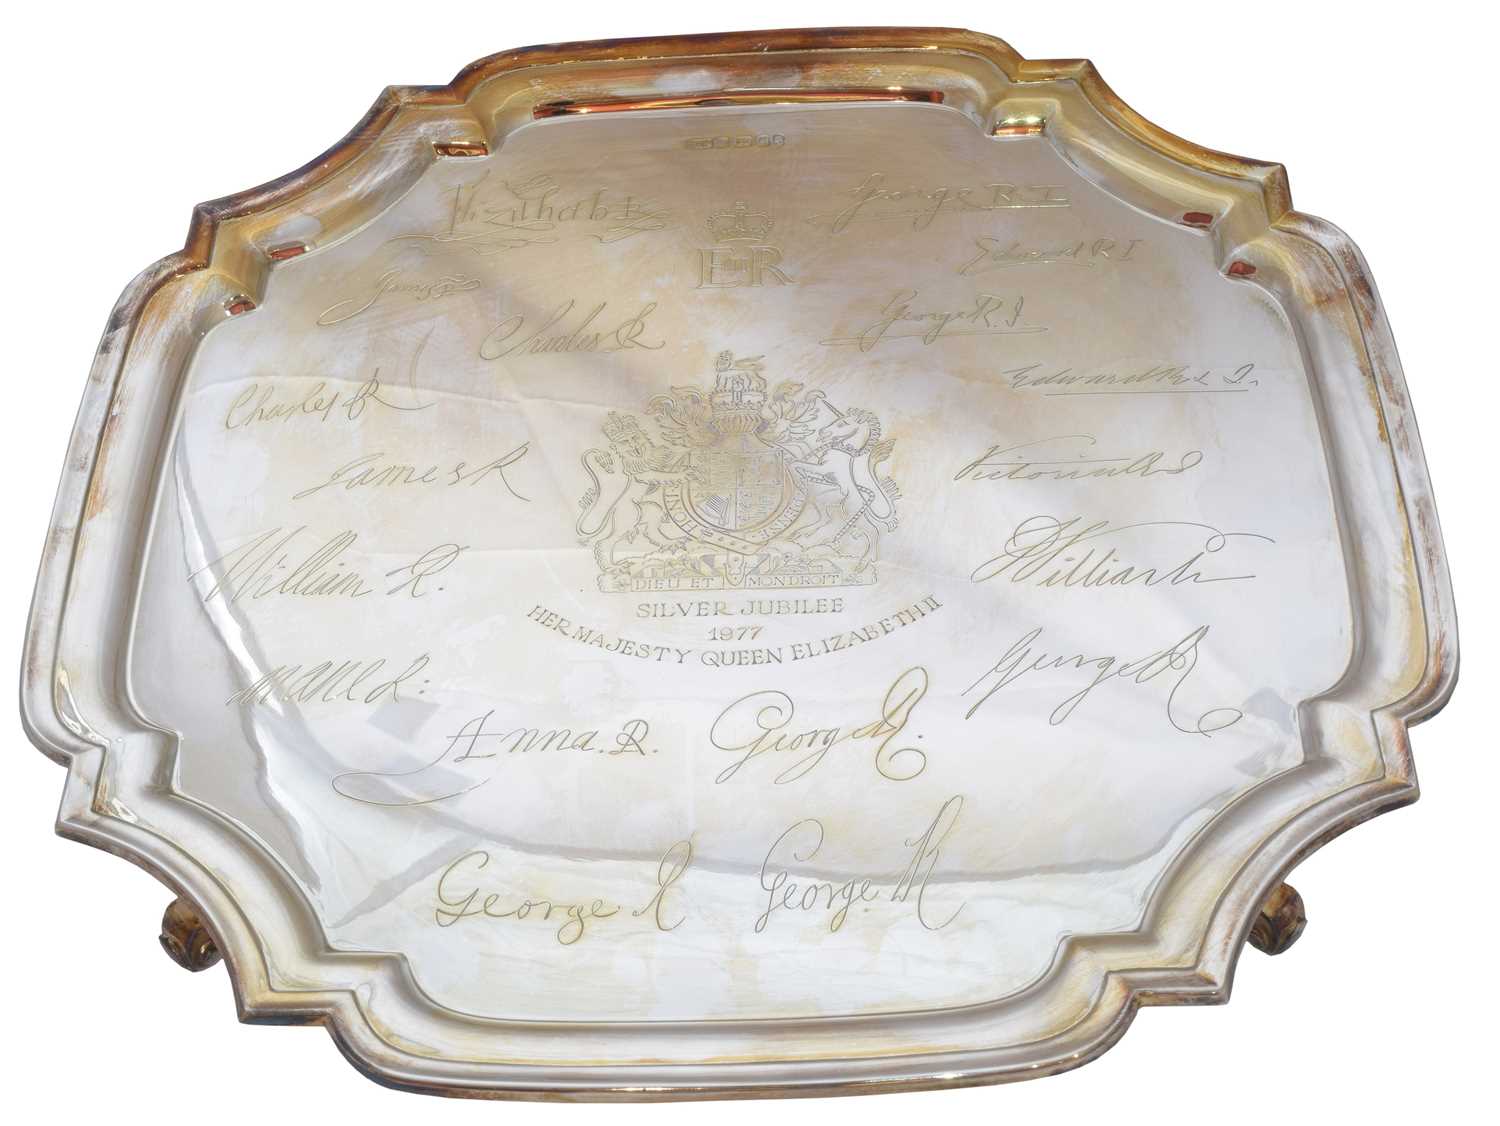 Lot 46 - A cased silver jubilee commemorative salver, limited edition, no. 27/250